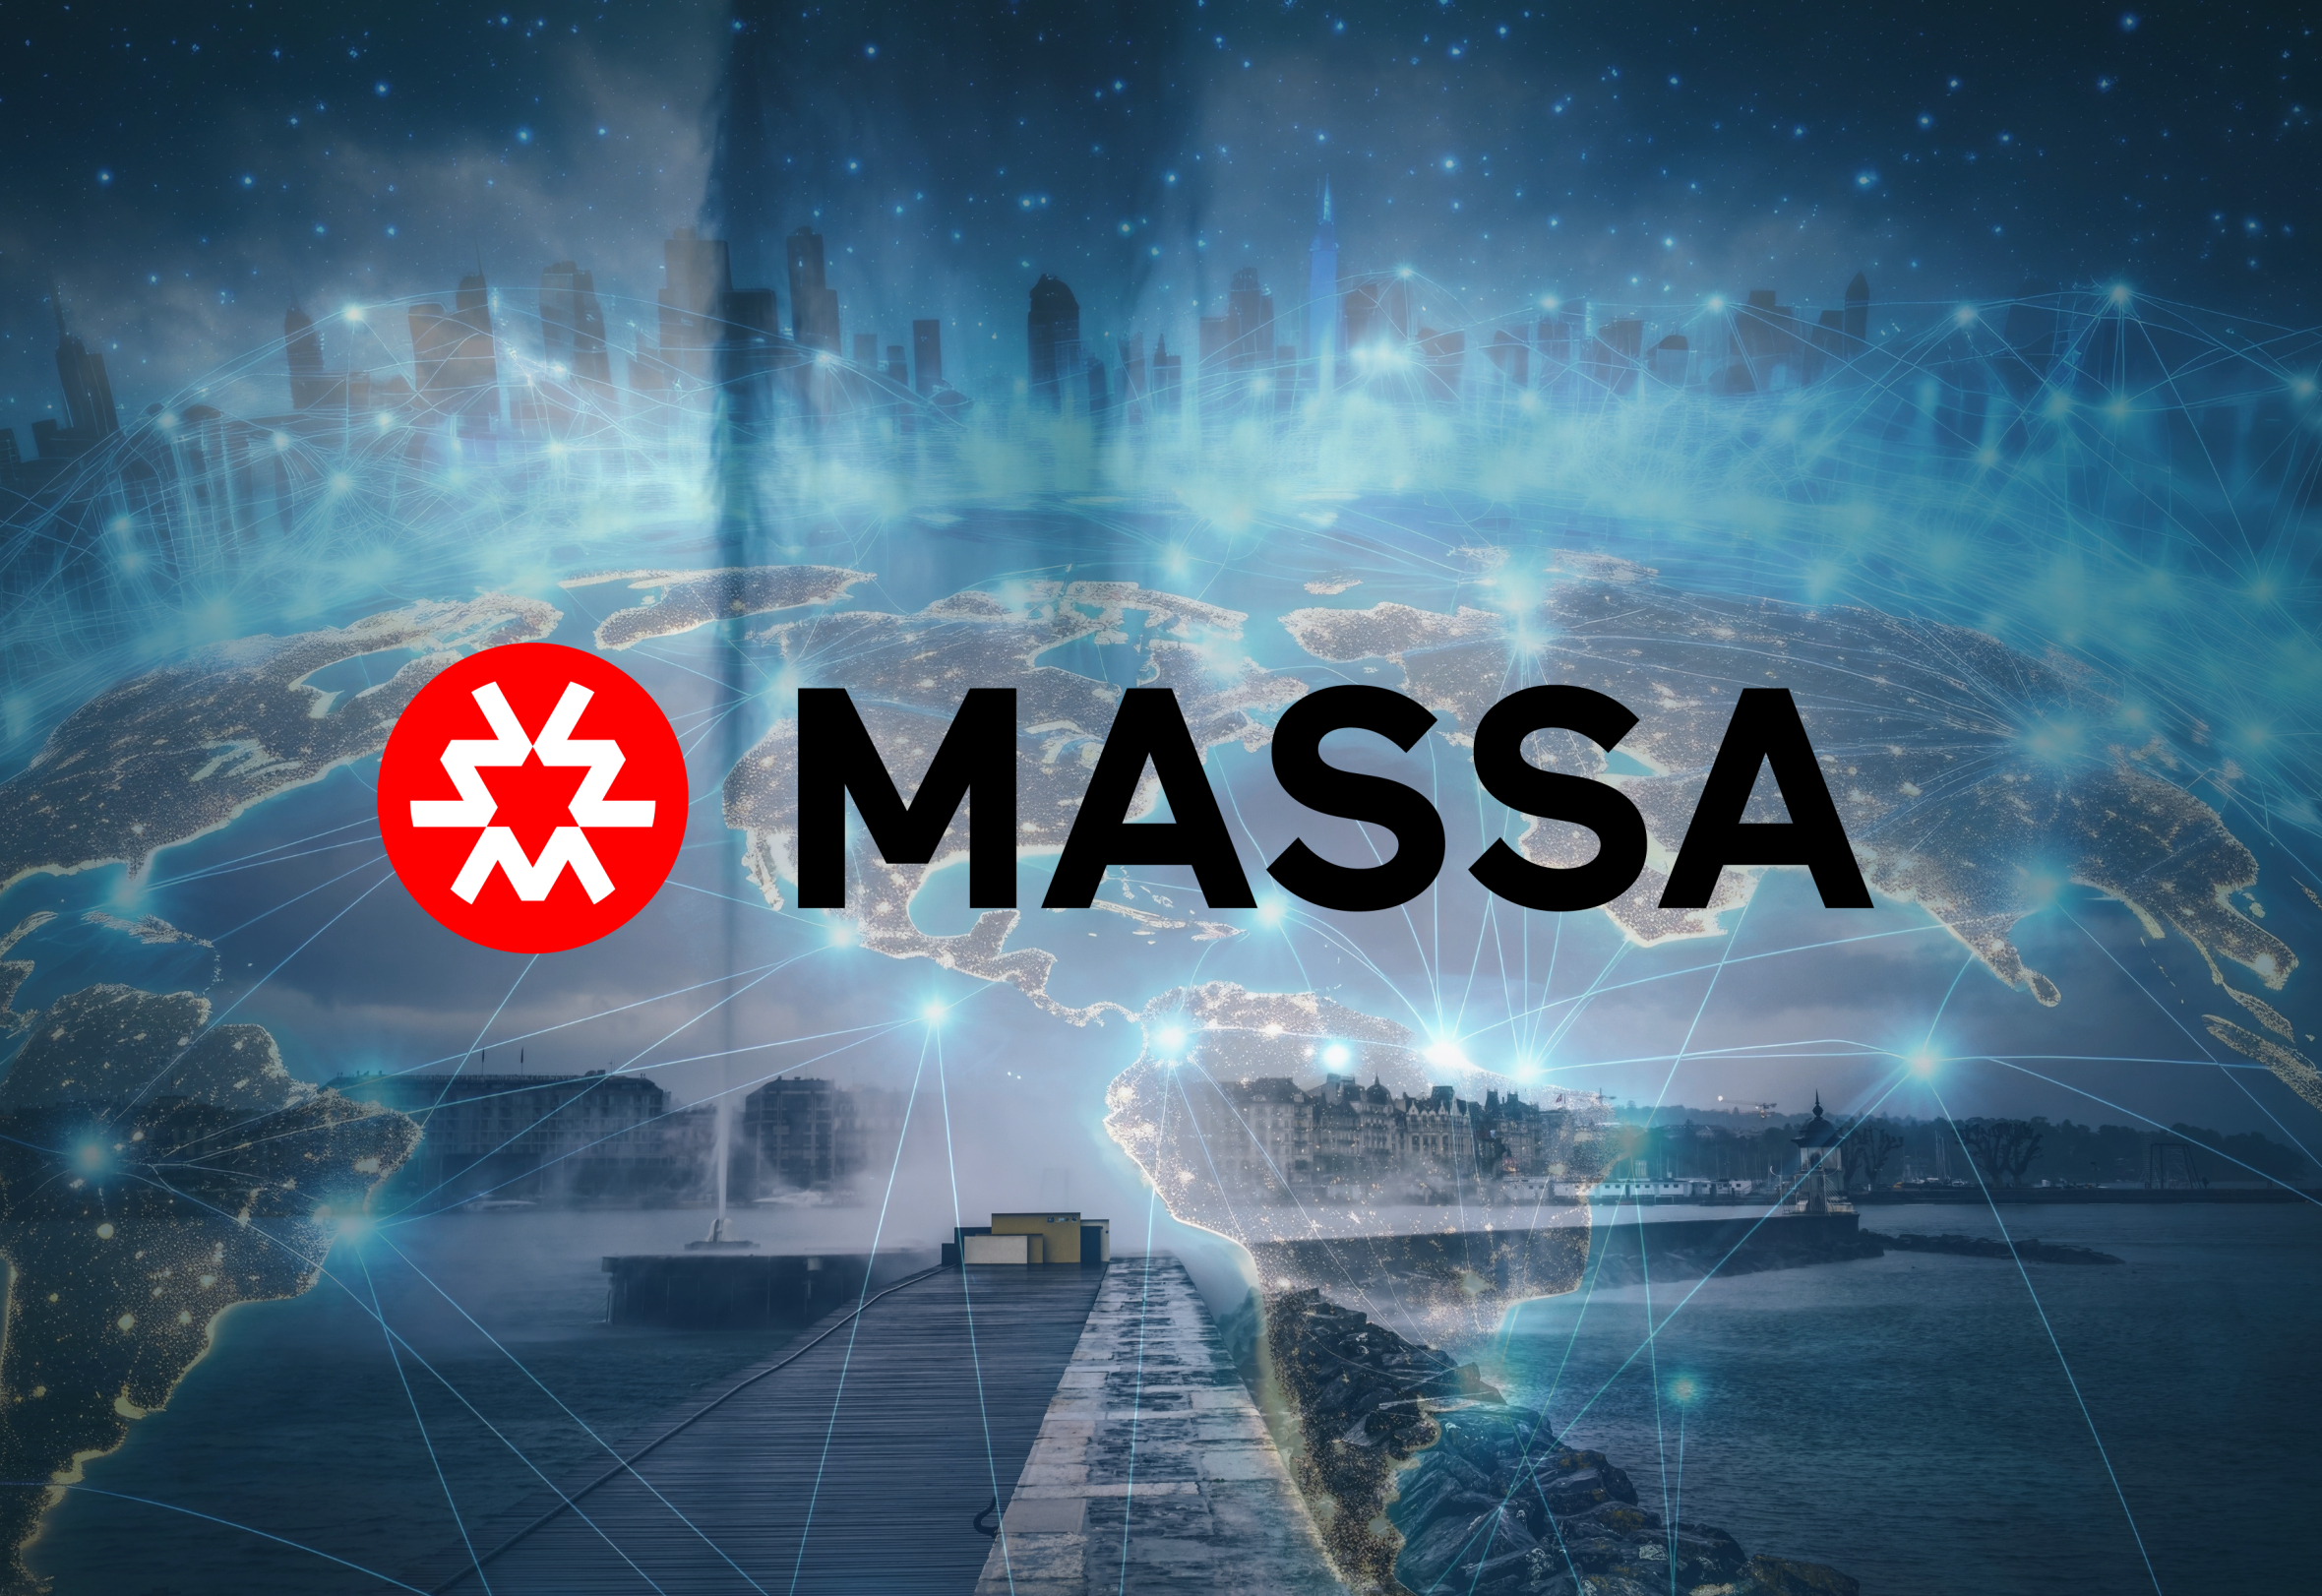 Massa's choice of Geneva underlines the growing importance of the canton in the global blockchain landscape, which promises to be a fertile ground for the development and expansion of disruptive technologies.